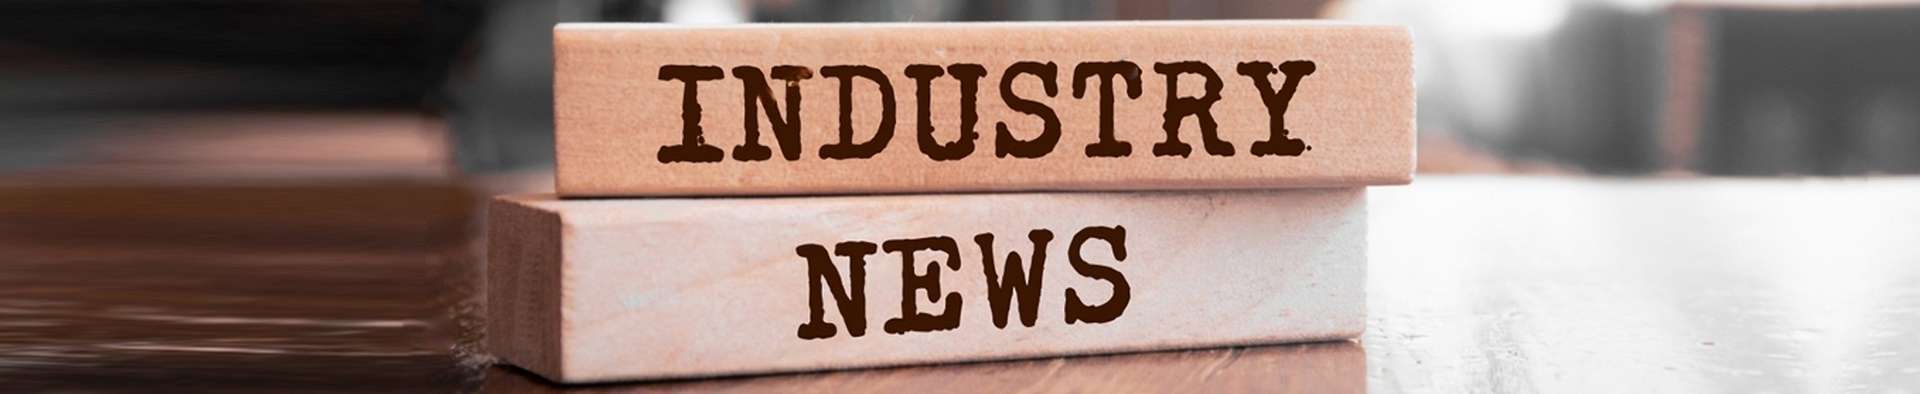 Industry News Banner